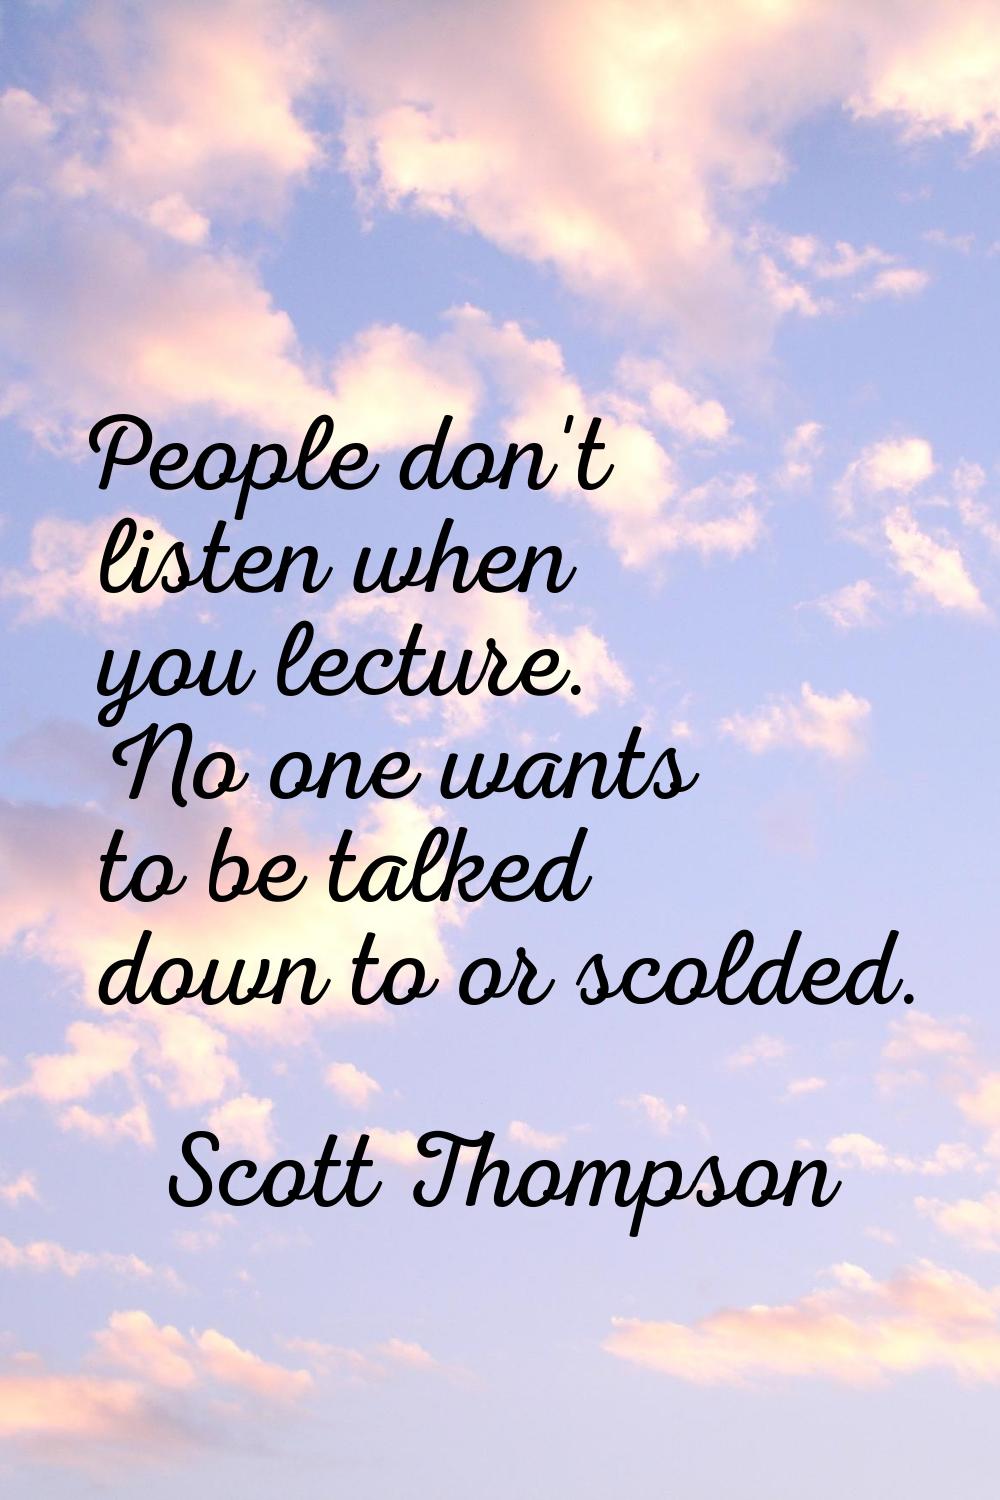 People don't listen when you lecture. No one wants to be talked down to or scolded.